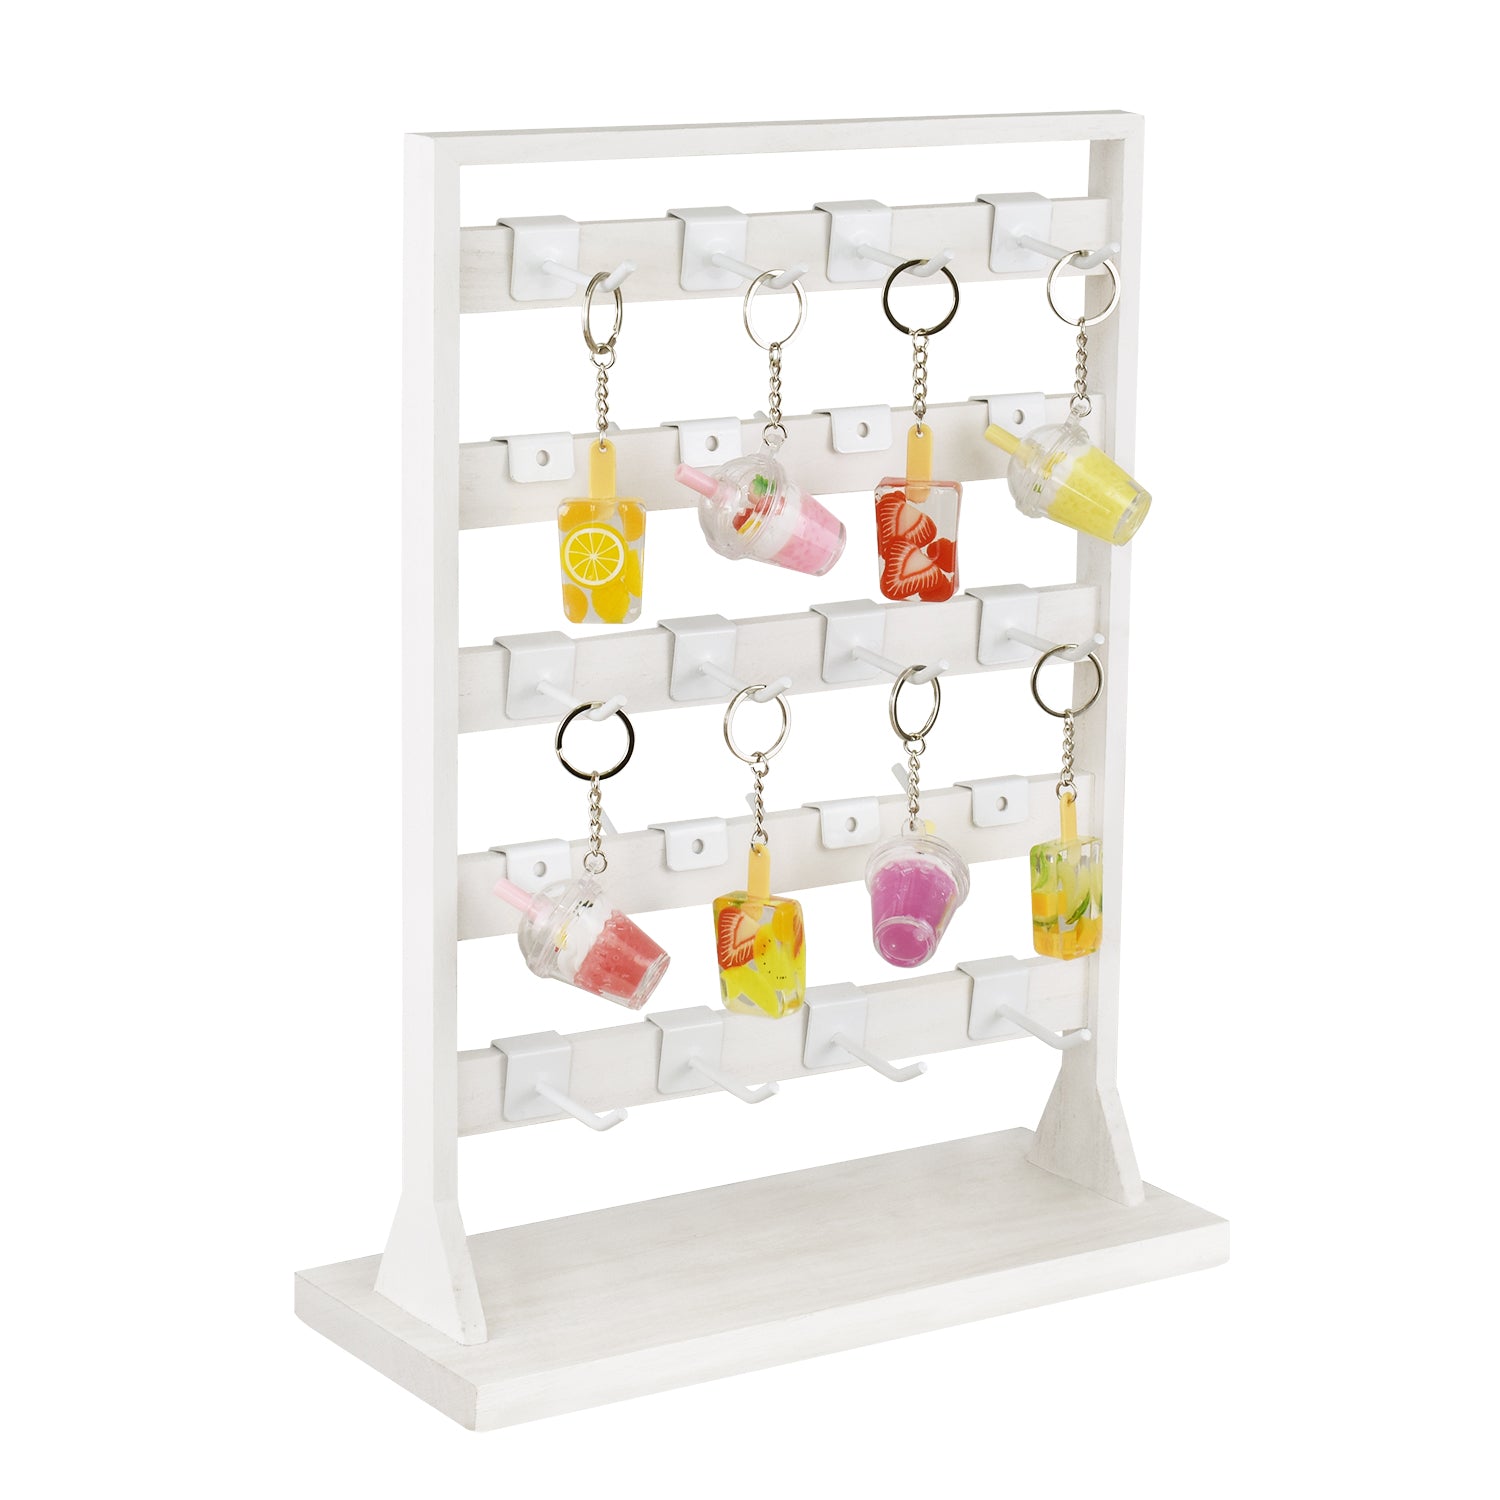 Ikee Design Wooden Jewelry Display Rack with 20 Bahrain